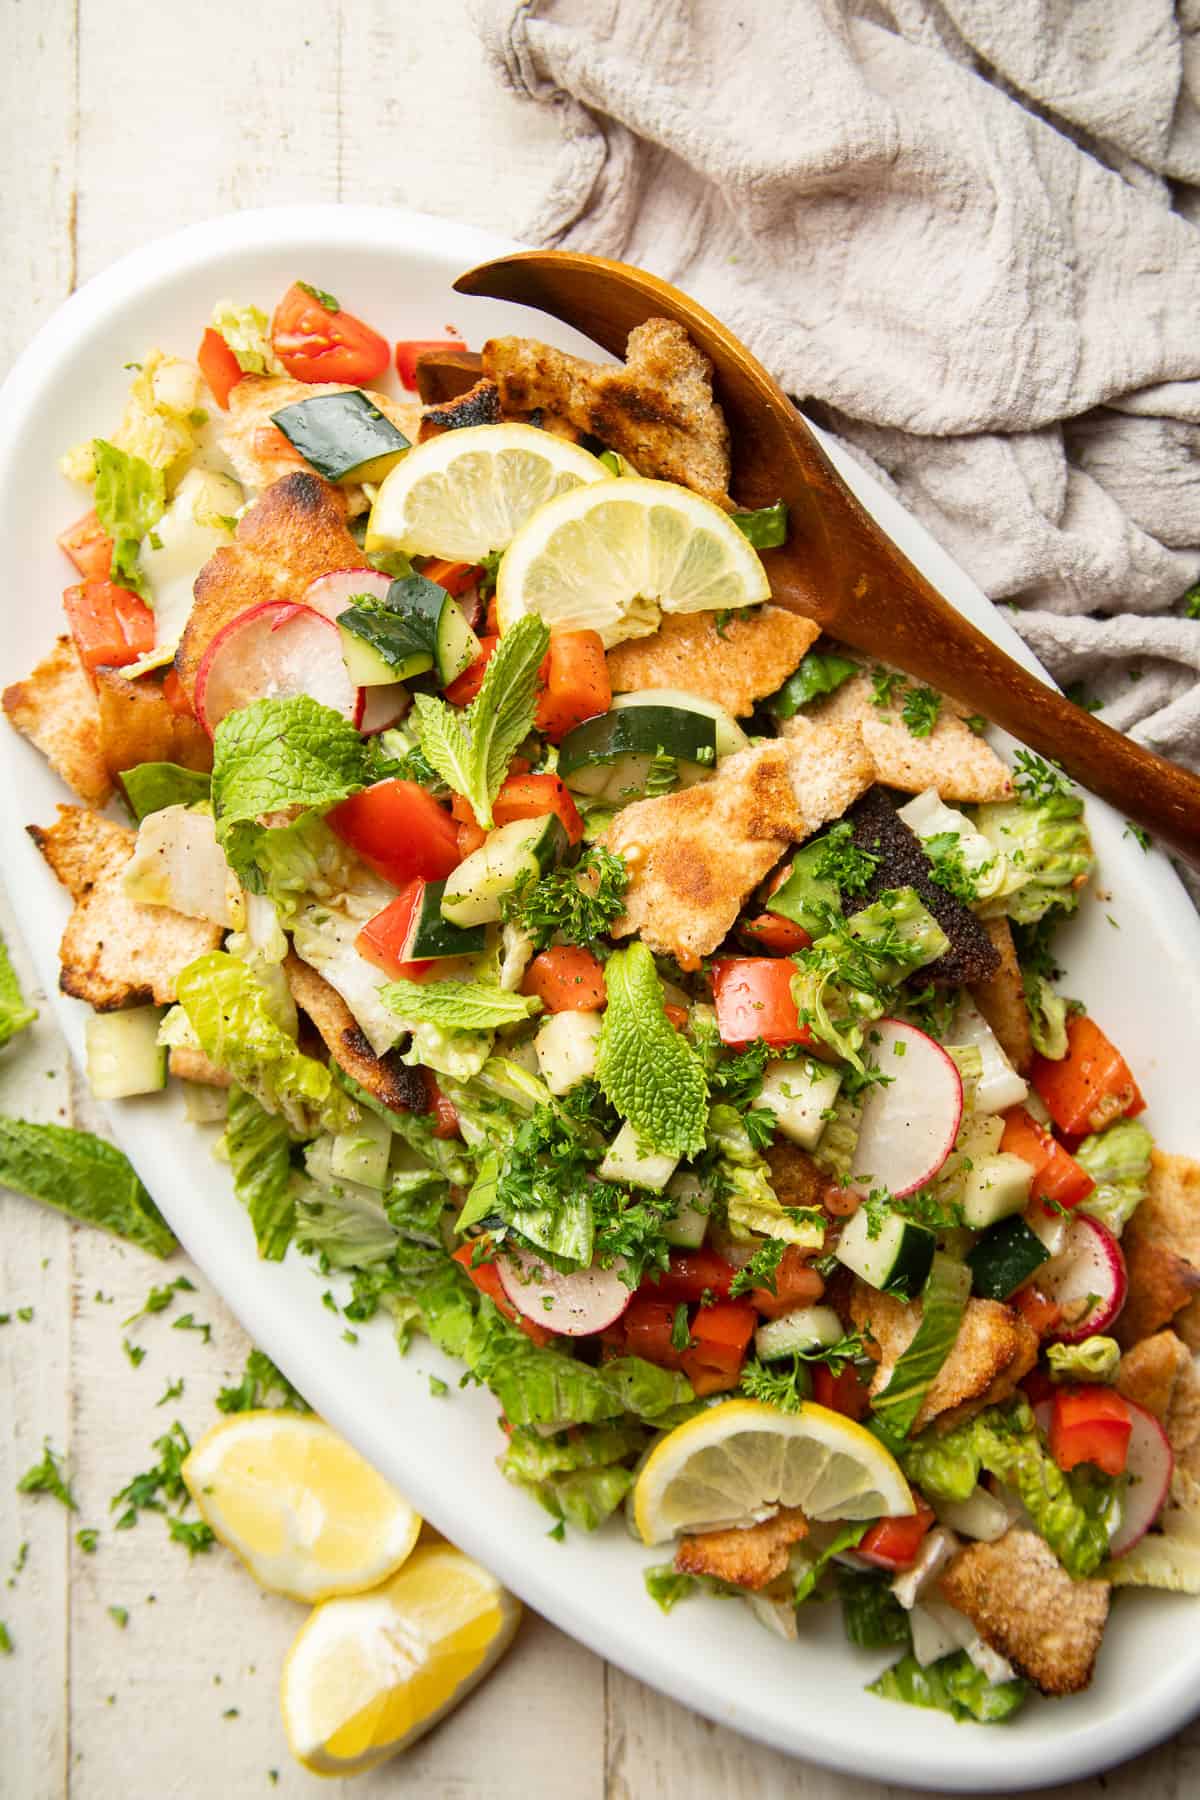 Dish of Fattoush Salad and serving spoon on a white wooden surface.